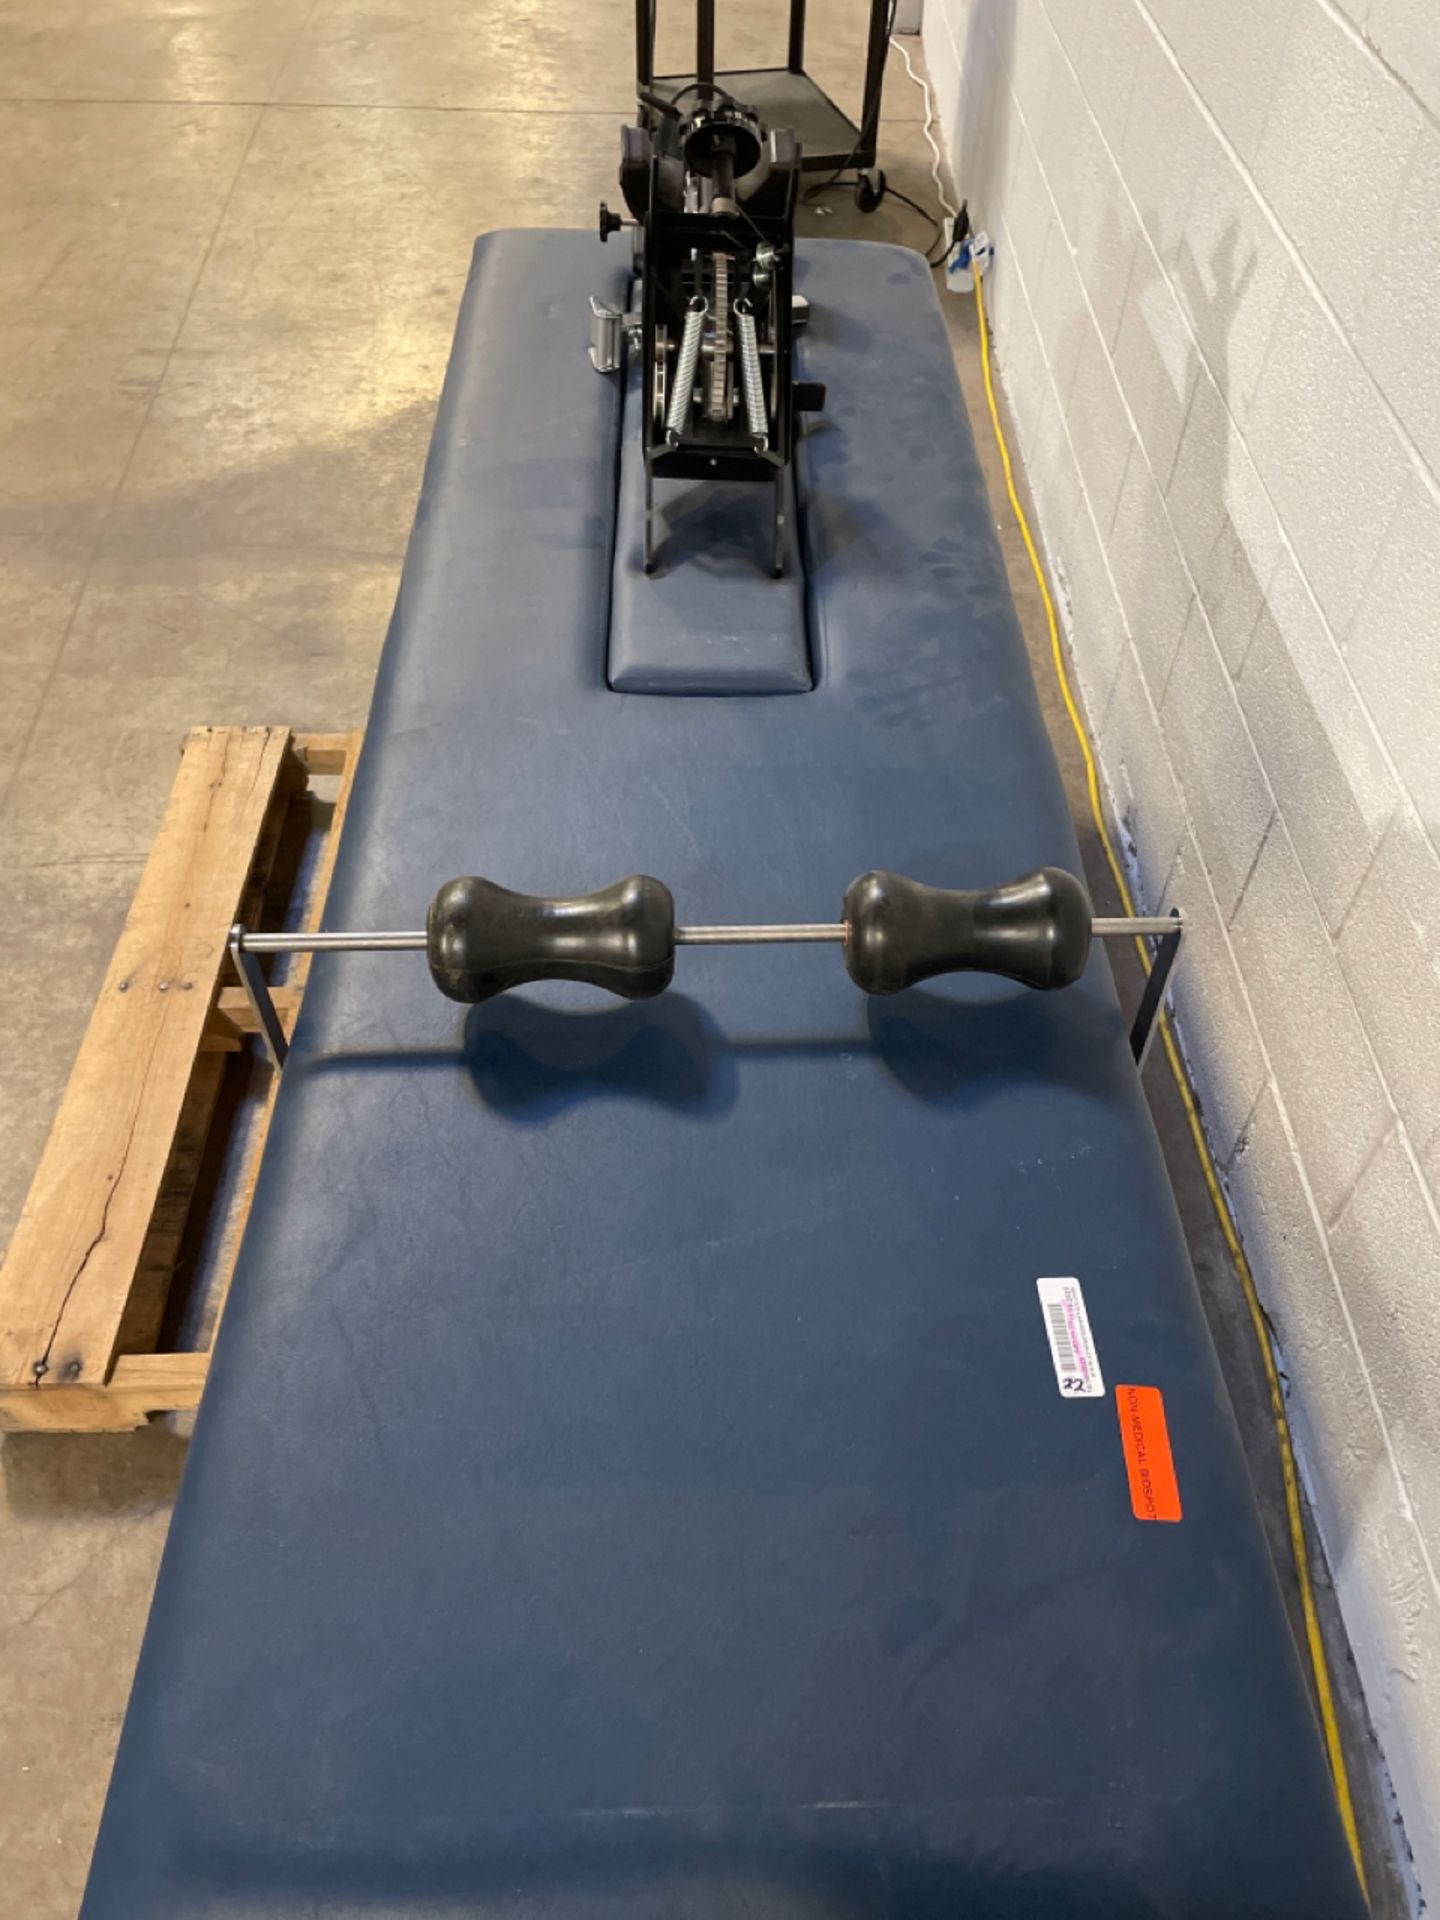 HILL LAB. ANATOMOTOR TRACTION TABLE - Image 4 of 4